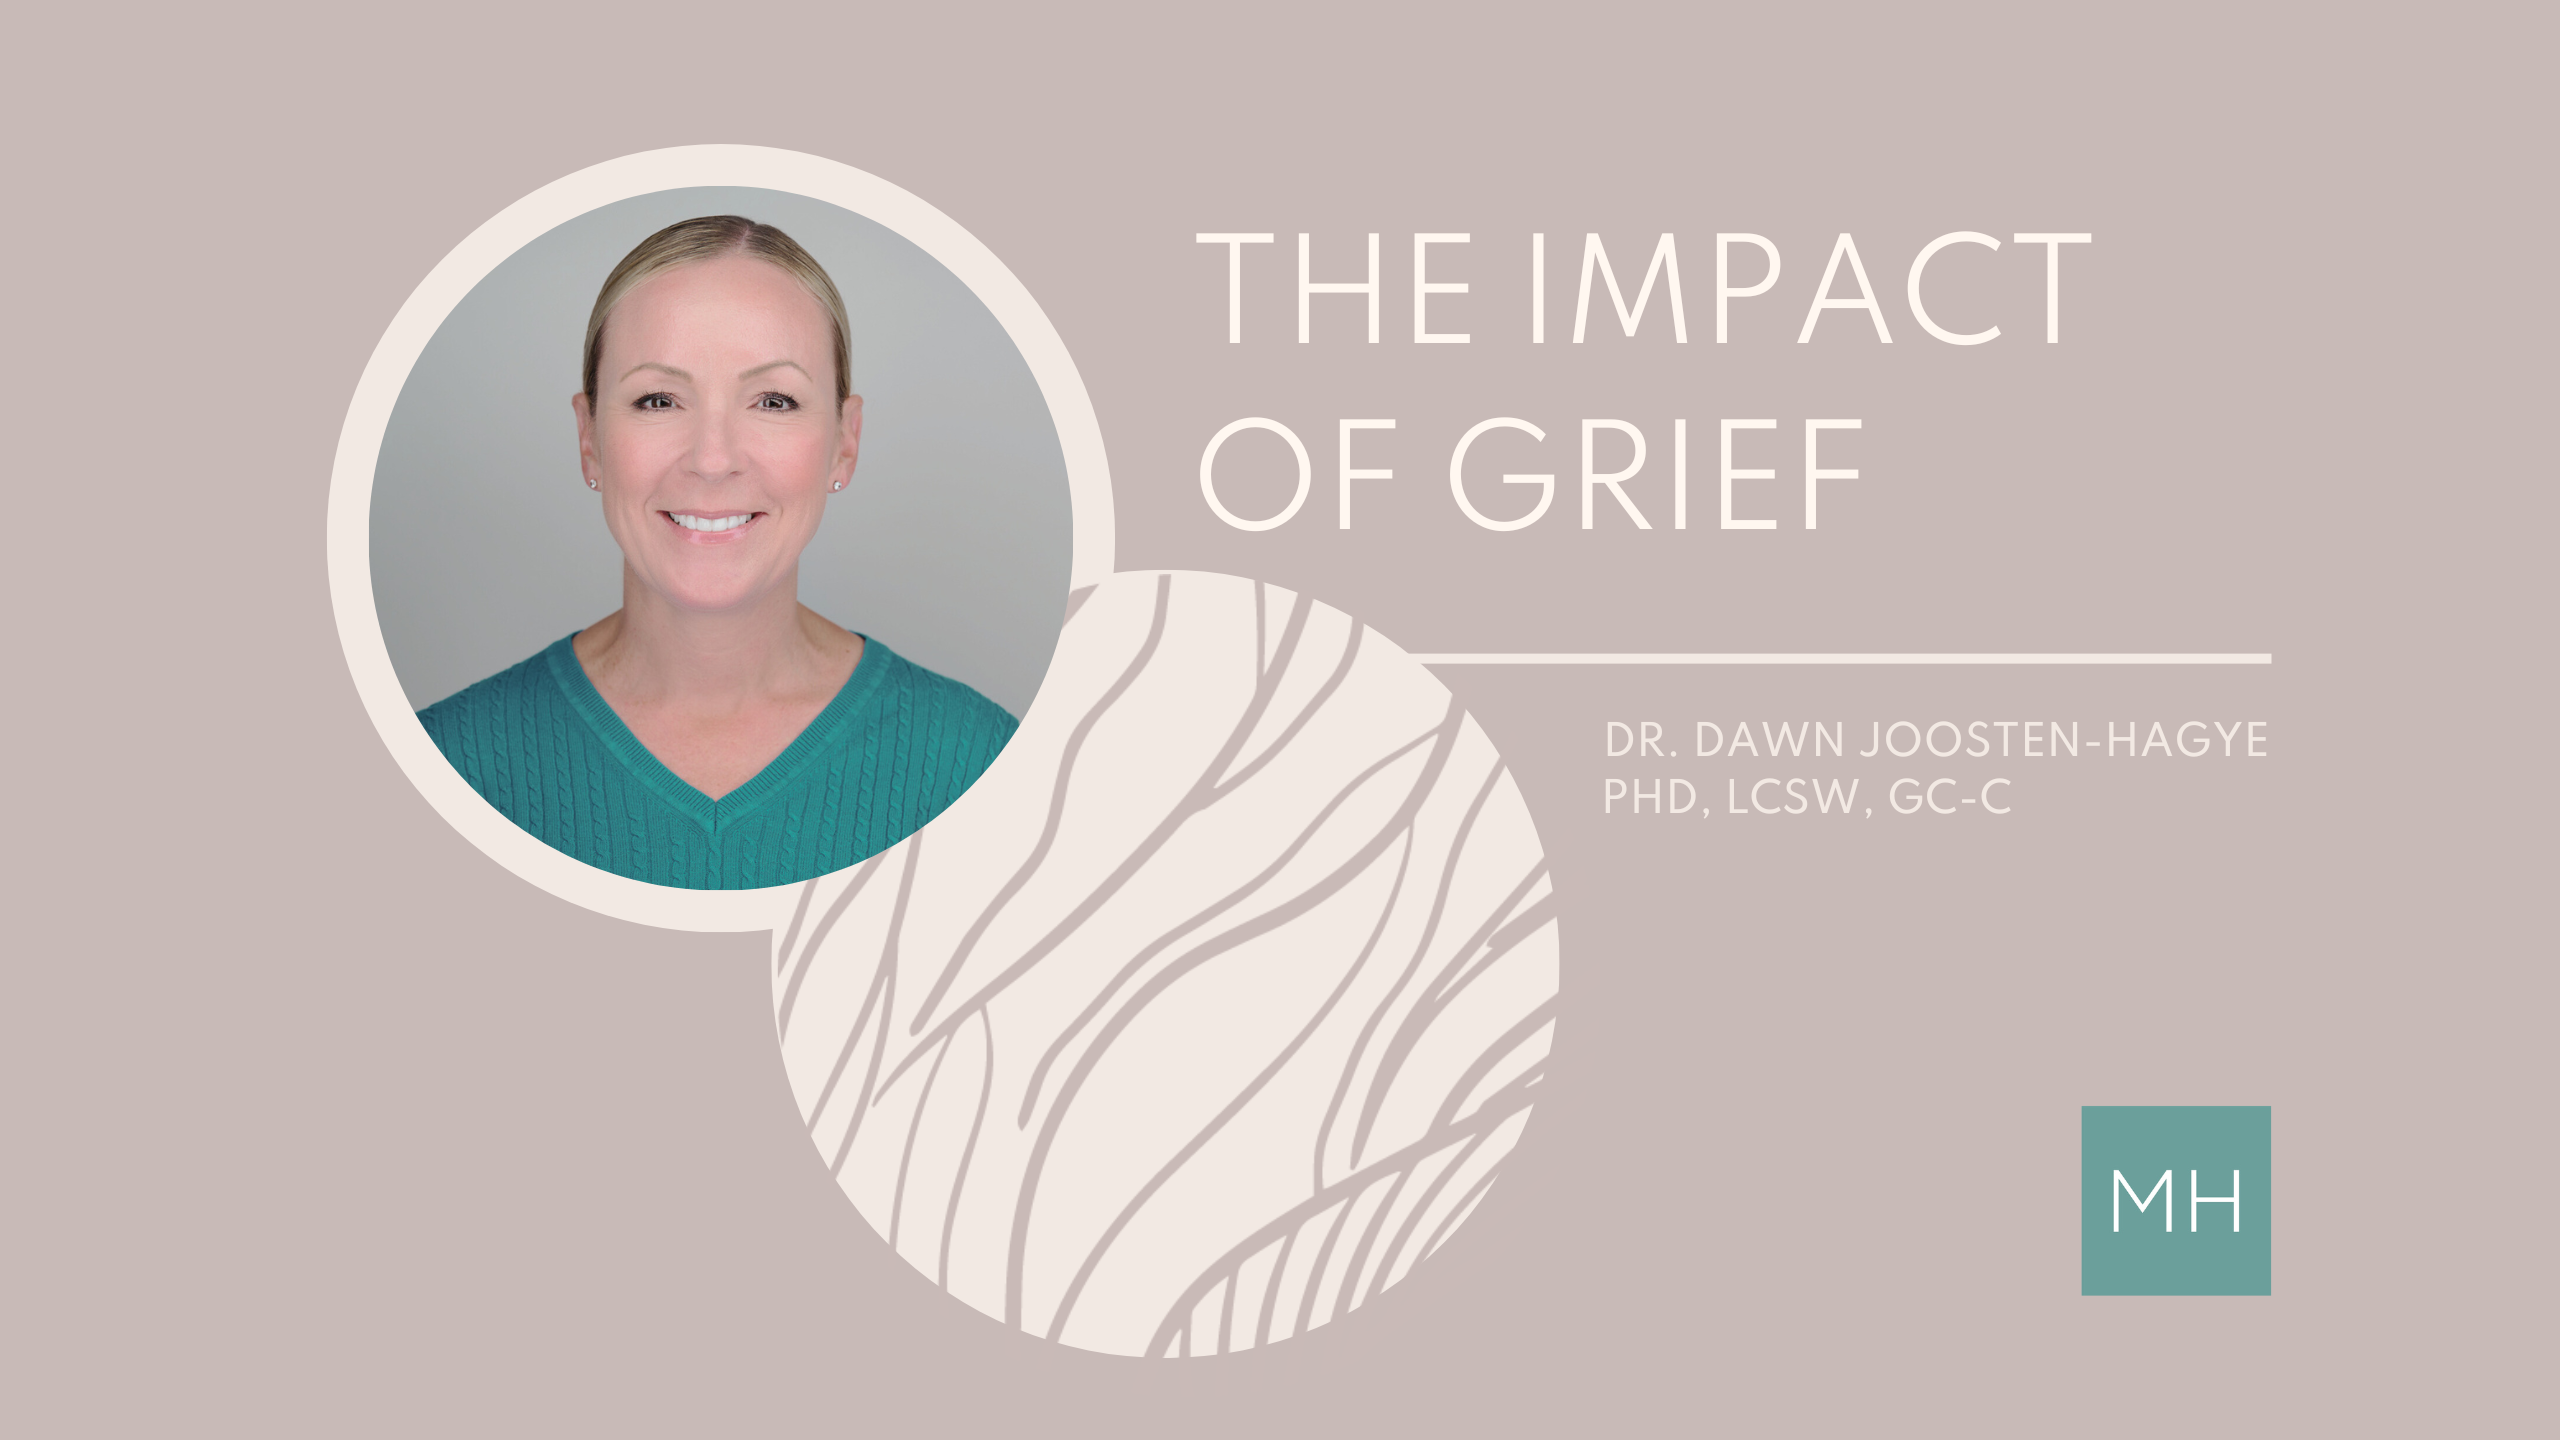 The Impact of Grief